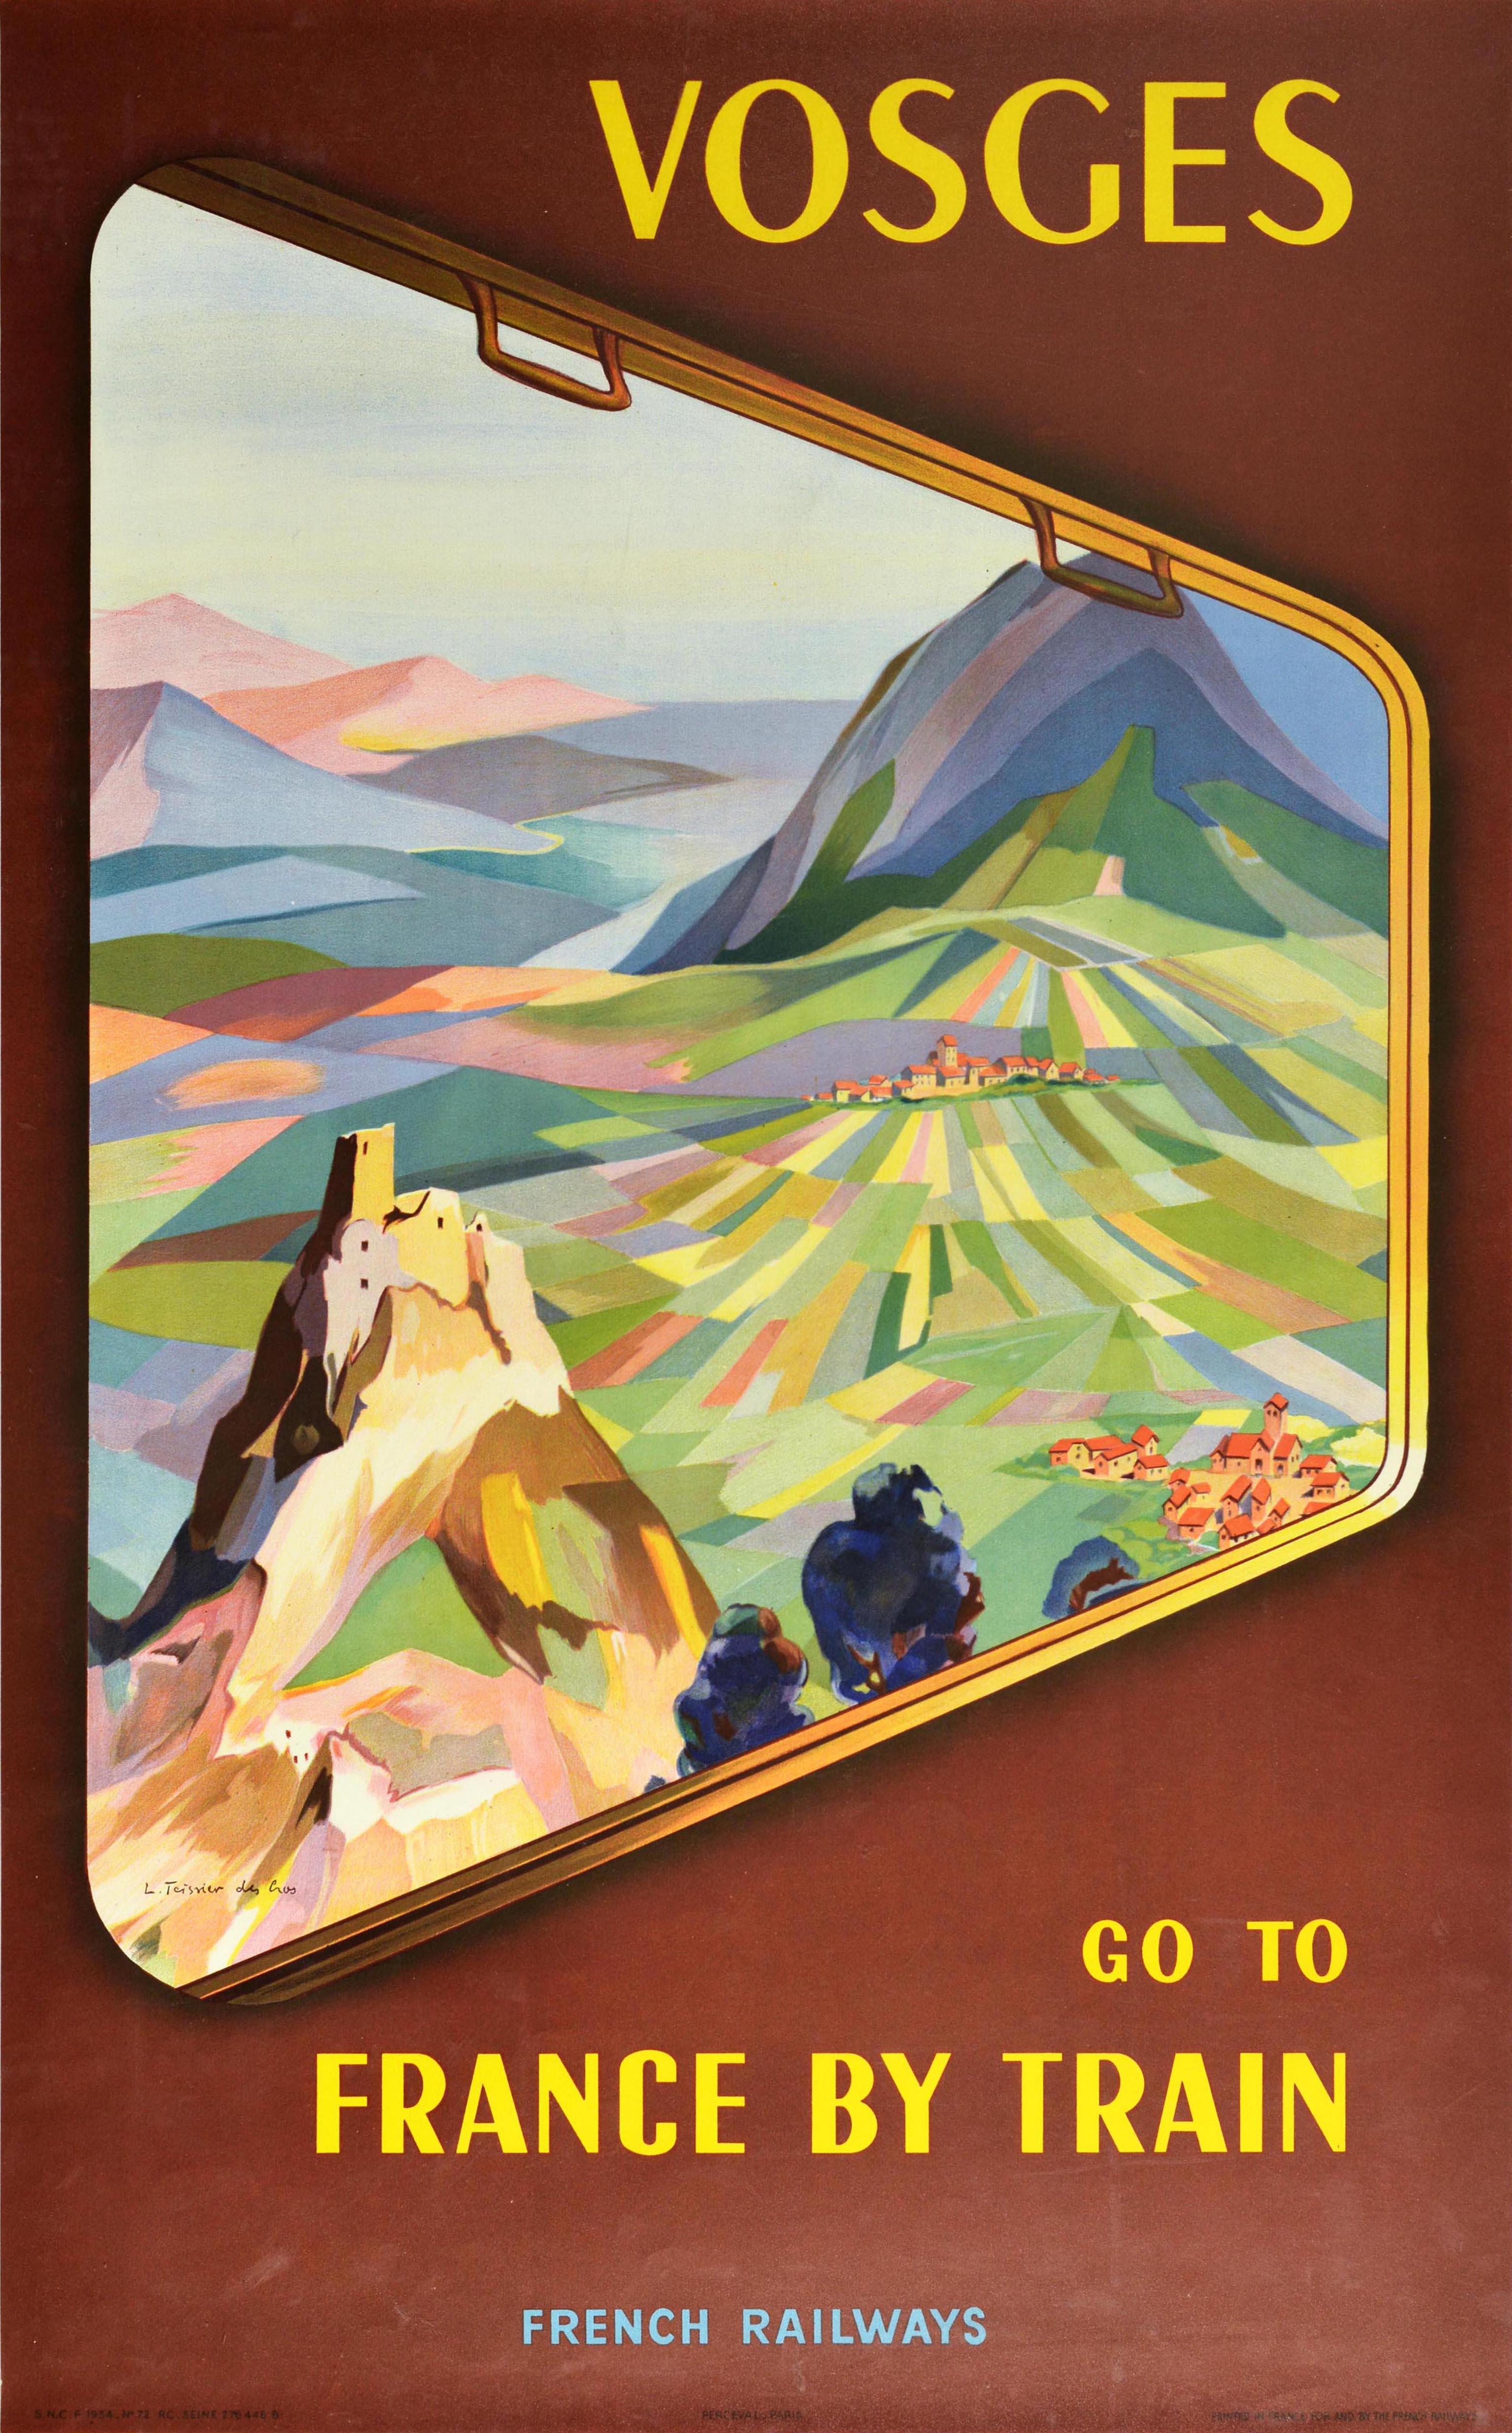 Original vintage French railway travel poster for Vosges in eastern France featuring a view out of a train window looking towards the historic Chateau de Wangenbourg castle ruins on a rocky hill top overlooking fields and villages with mountains in